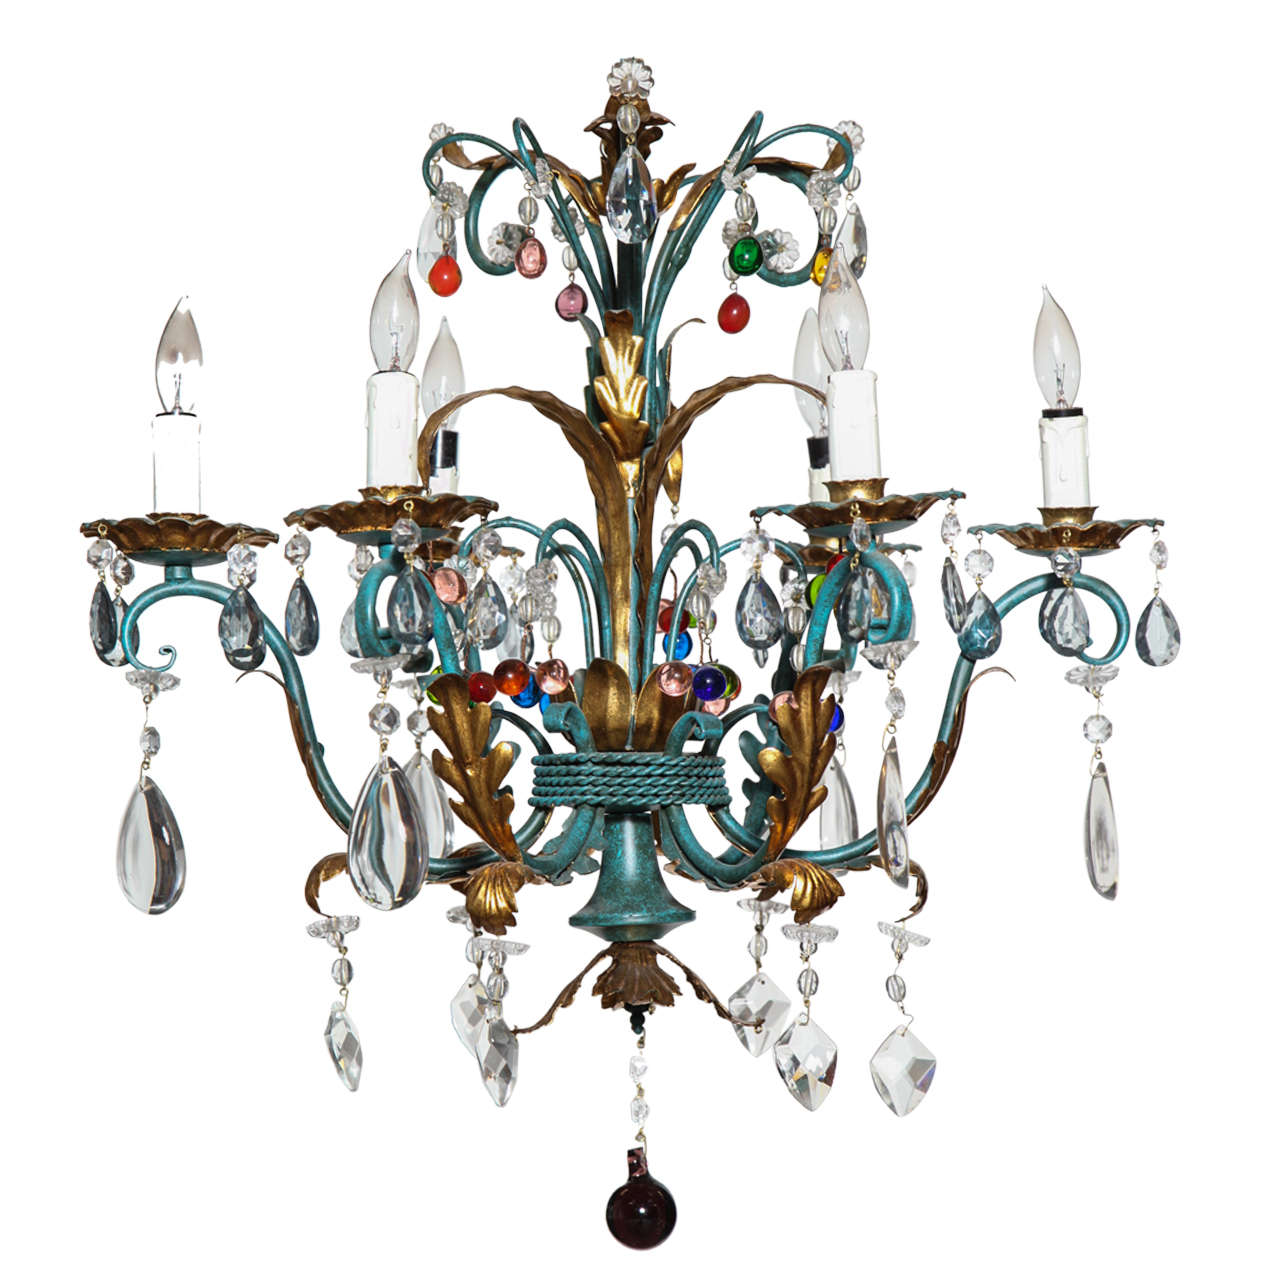 Vintage 1940s Italian Green and Gilt Chandelier with Colorful Crystals